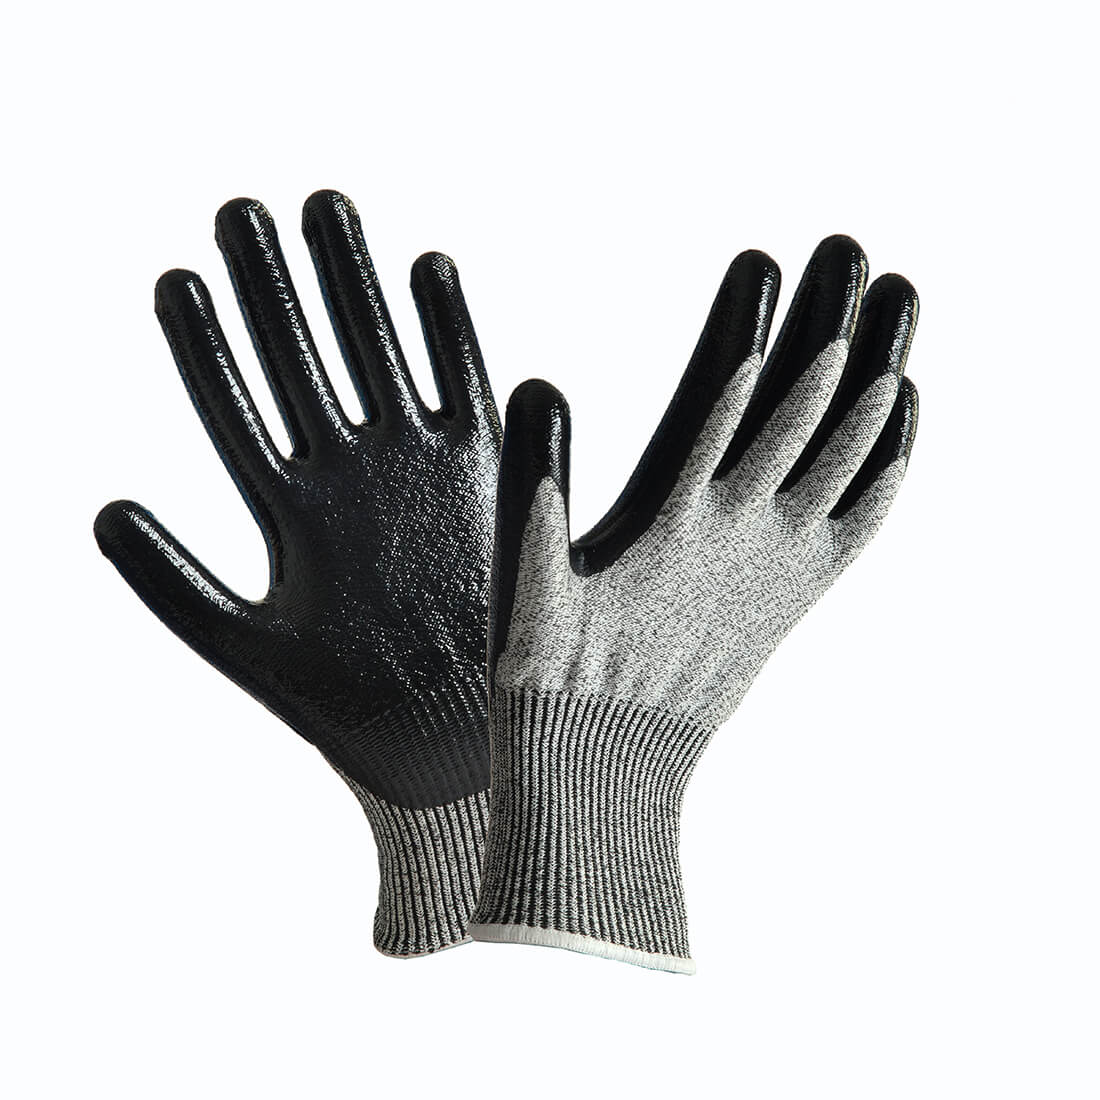 Cut resistance gloves,nitrile coated Featured Image